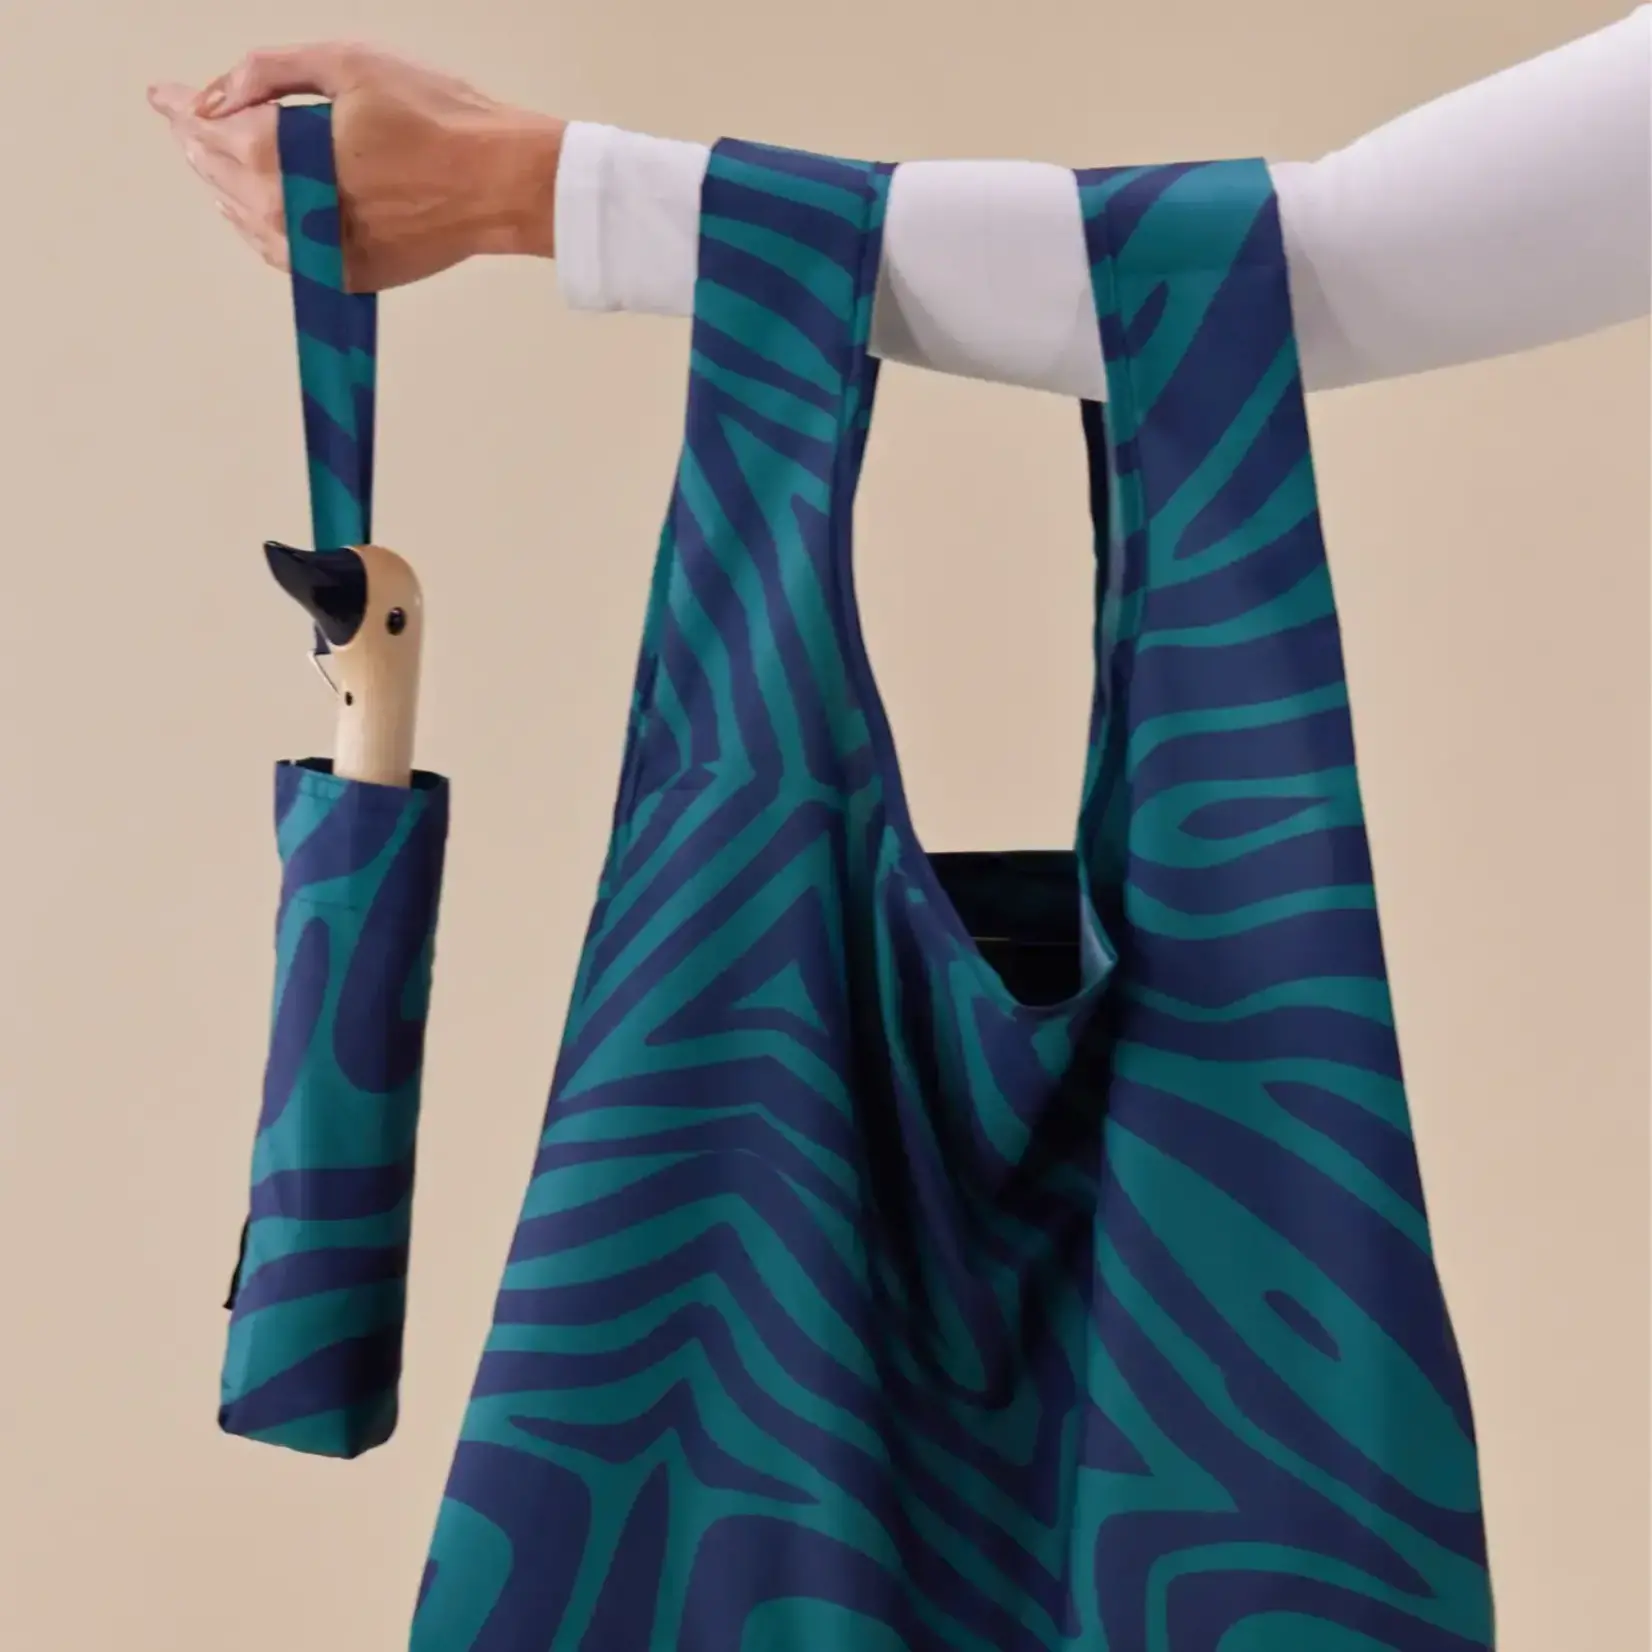 Swirl in Blue Reusable Eco Friendly Bag